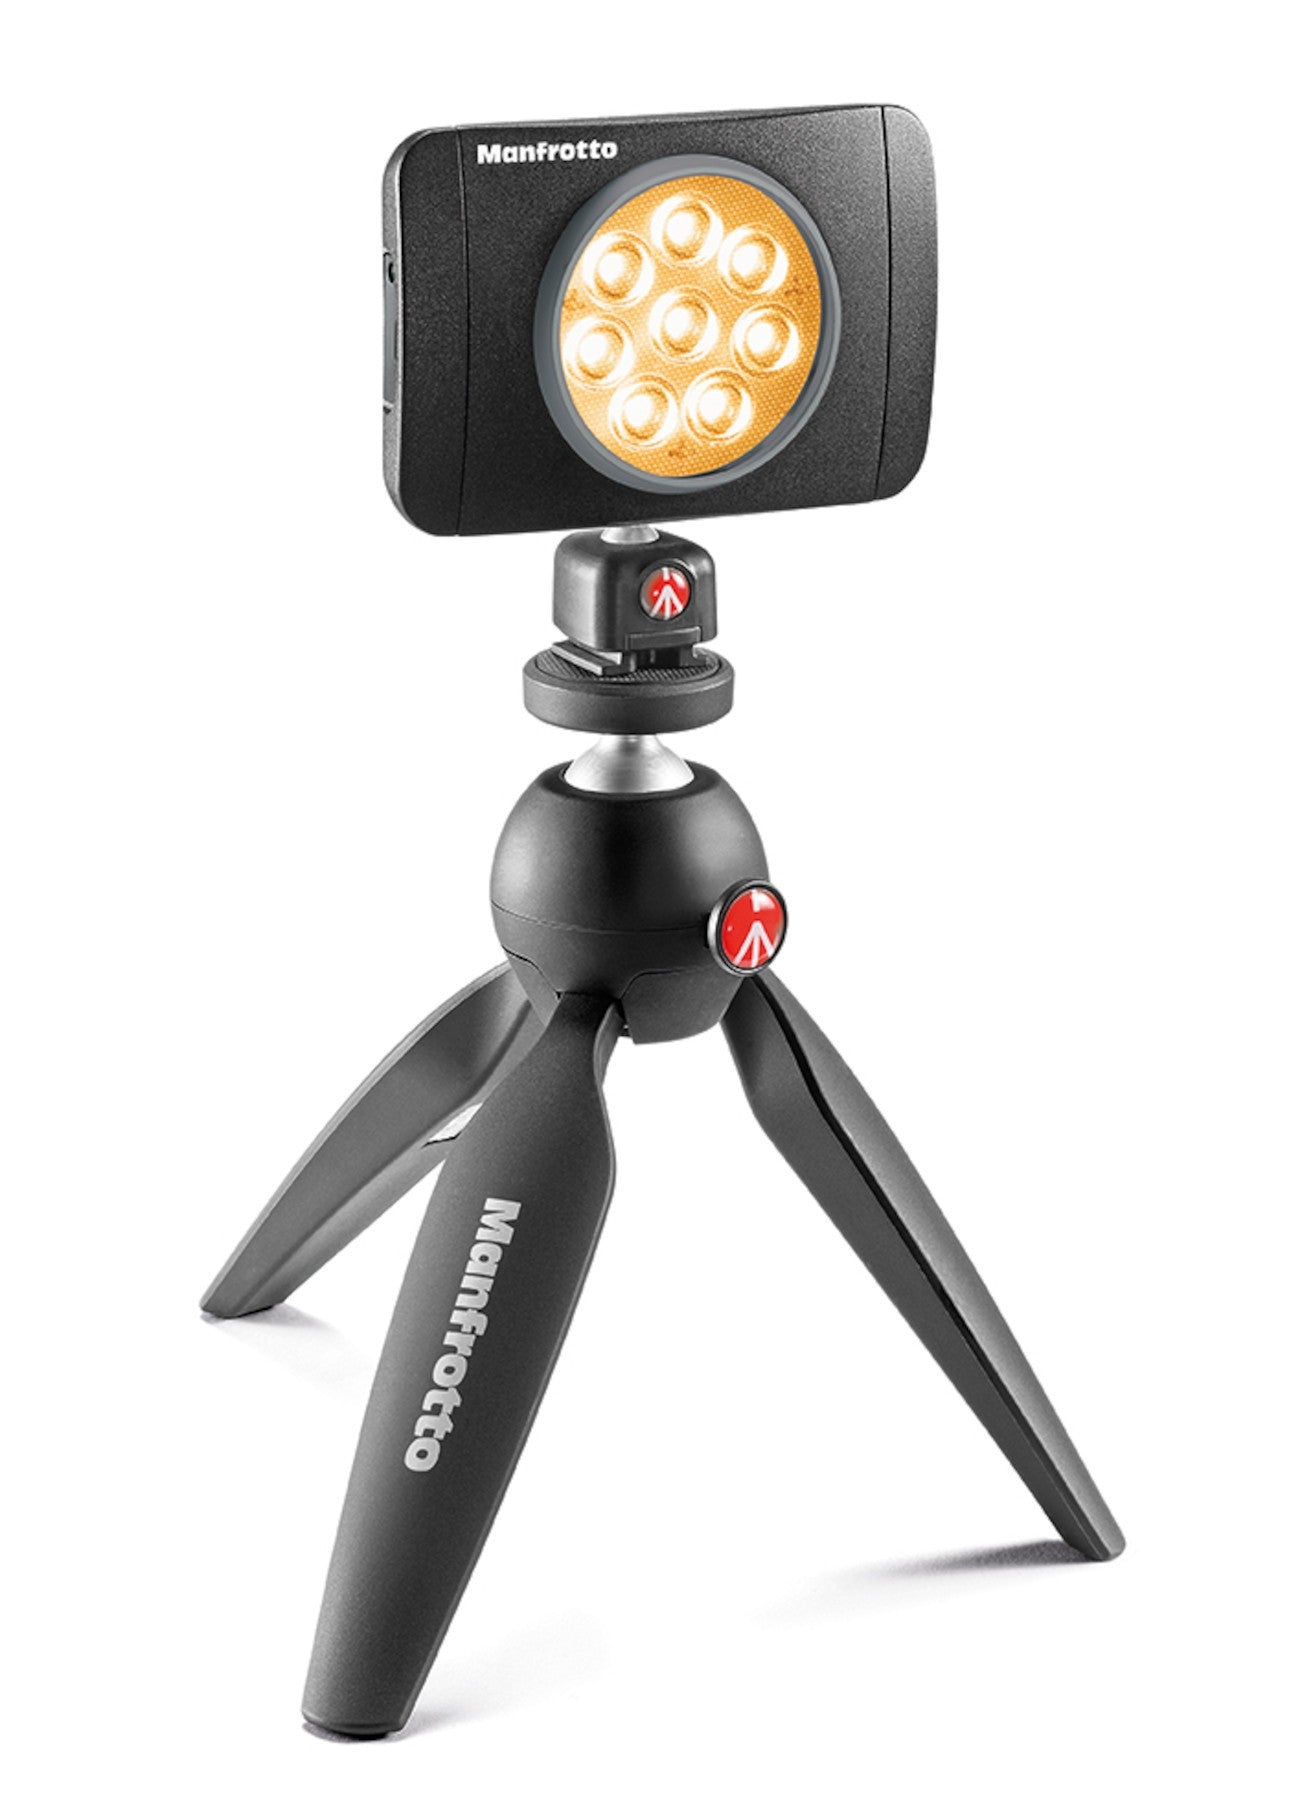 Manfrotto Lumie Series Muse LED Light, lighting led lights, Manfrotto - Pictureline  - 5